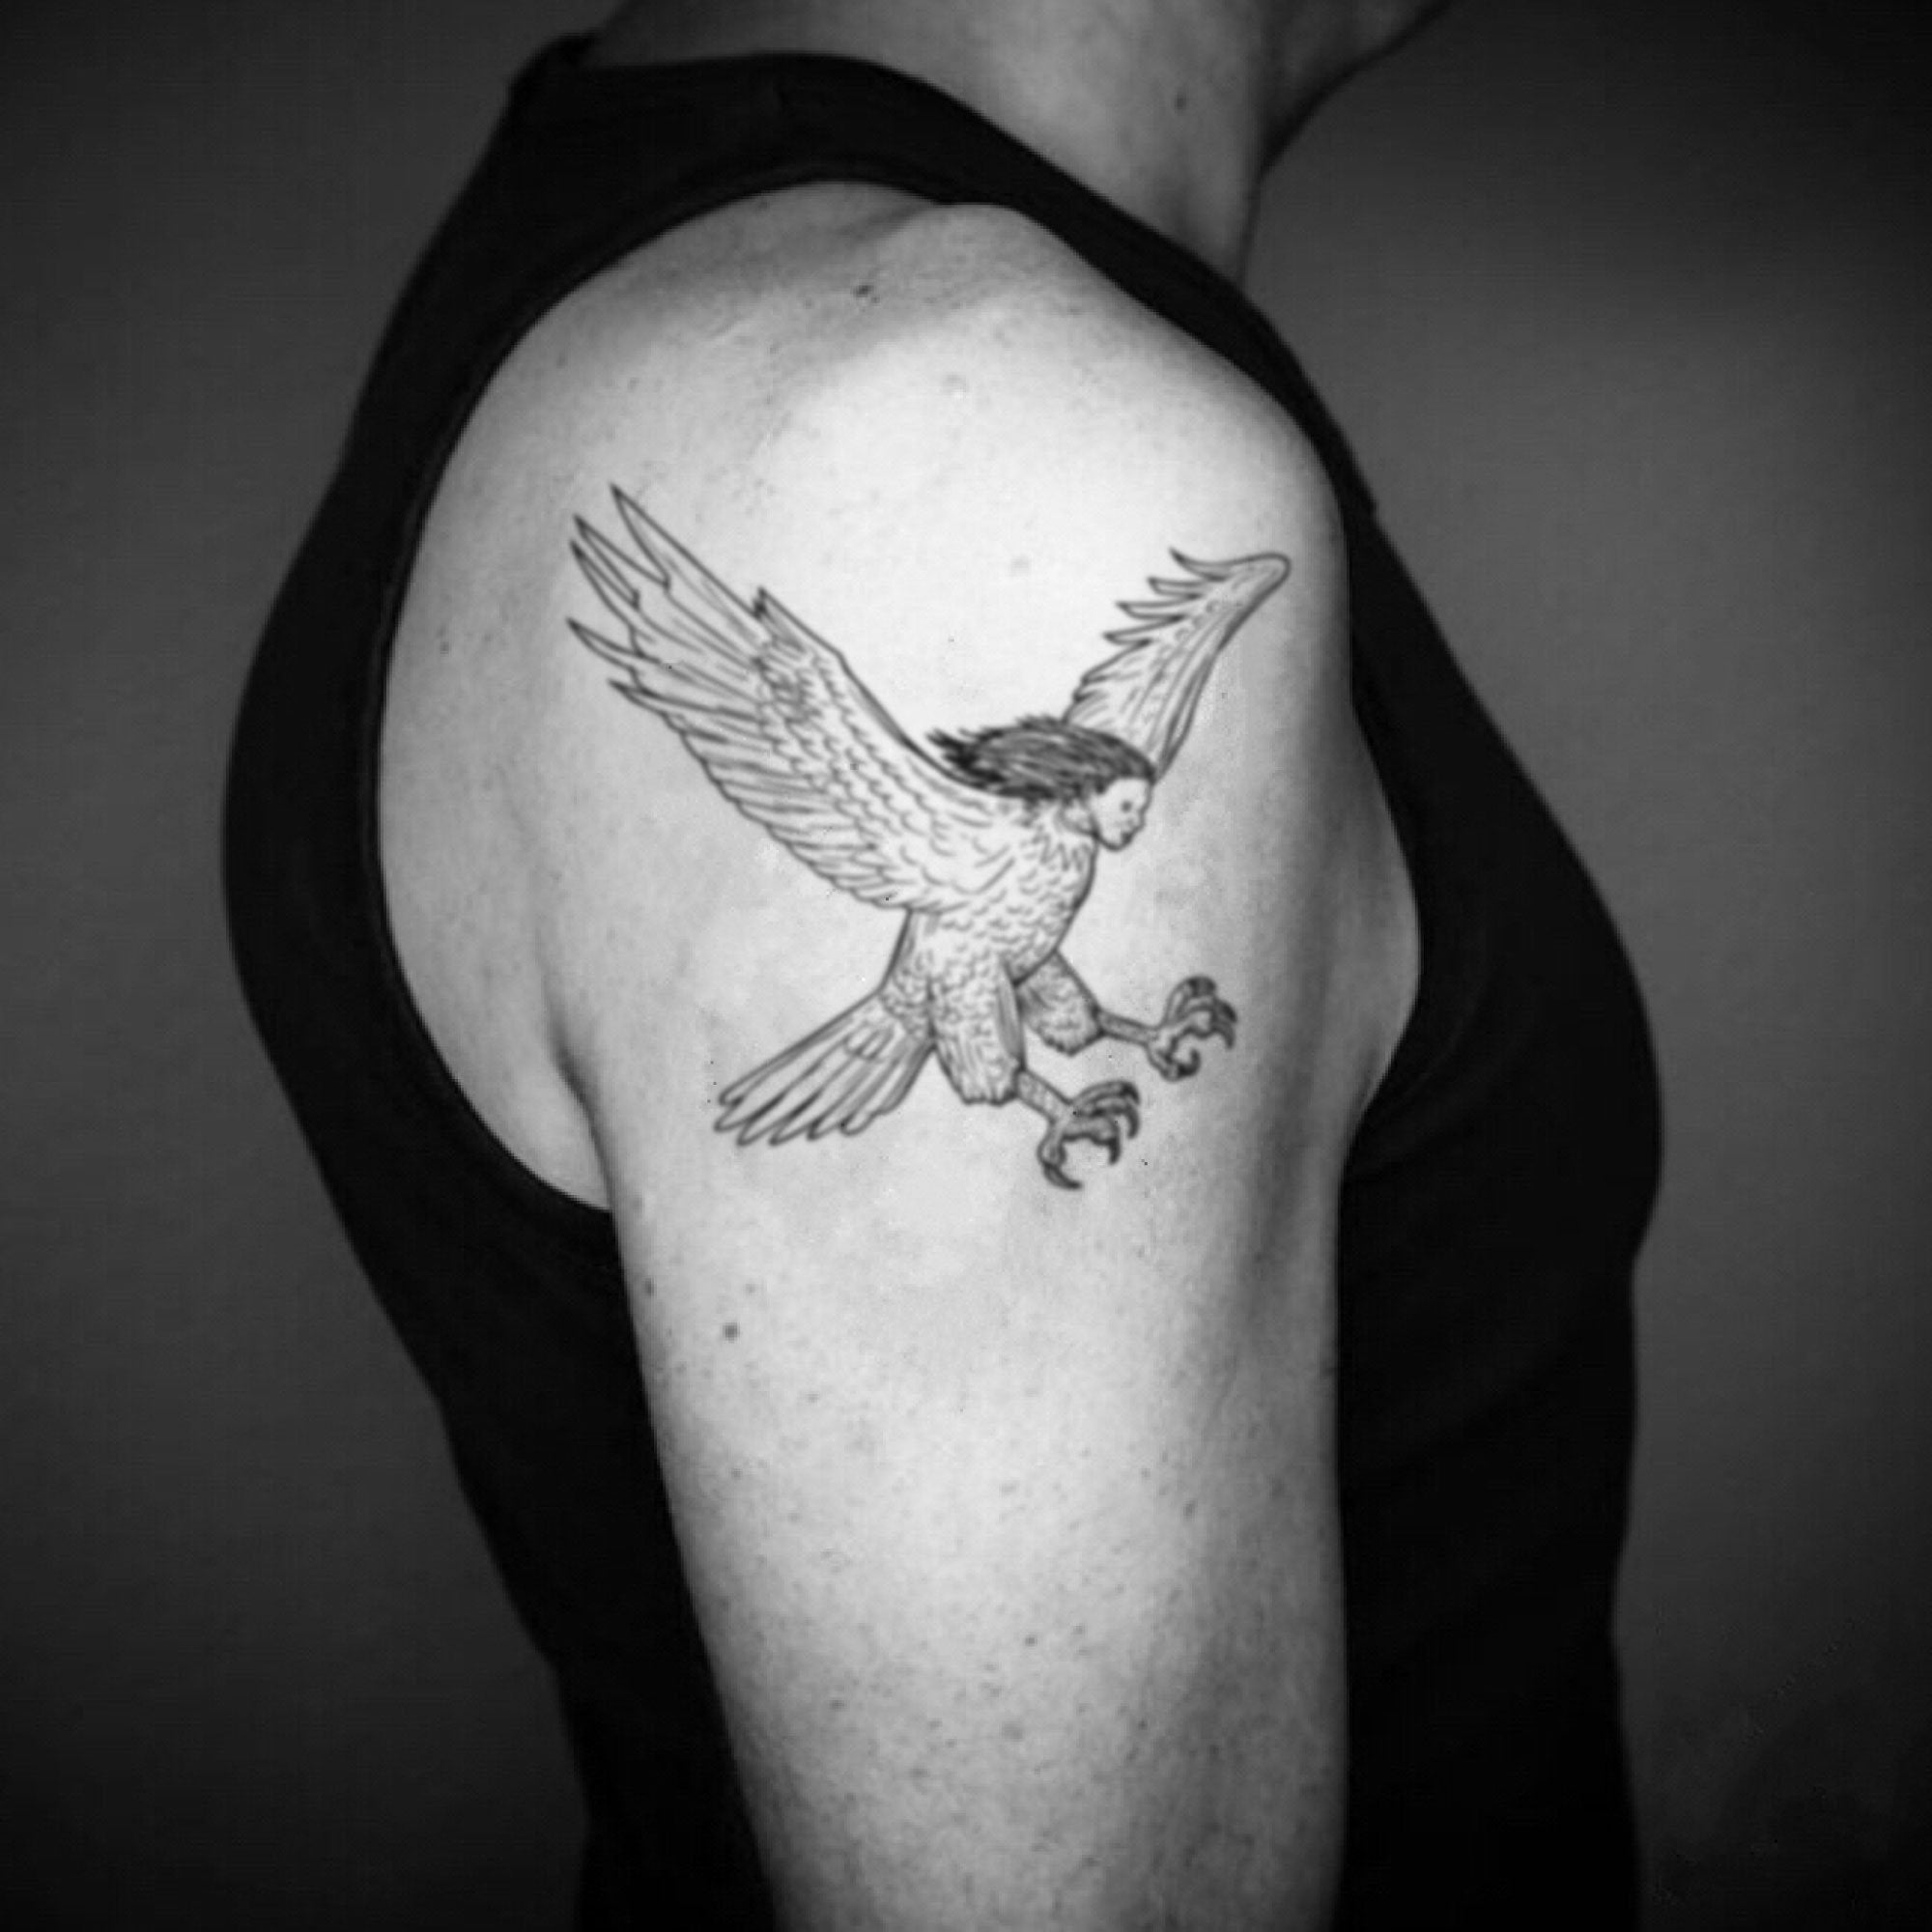 Hawk Tattoos And Meanings-Hawk Tattoo Designs And Ideas-Hawk Tattoo  Pictures - HubPages